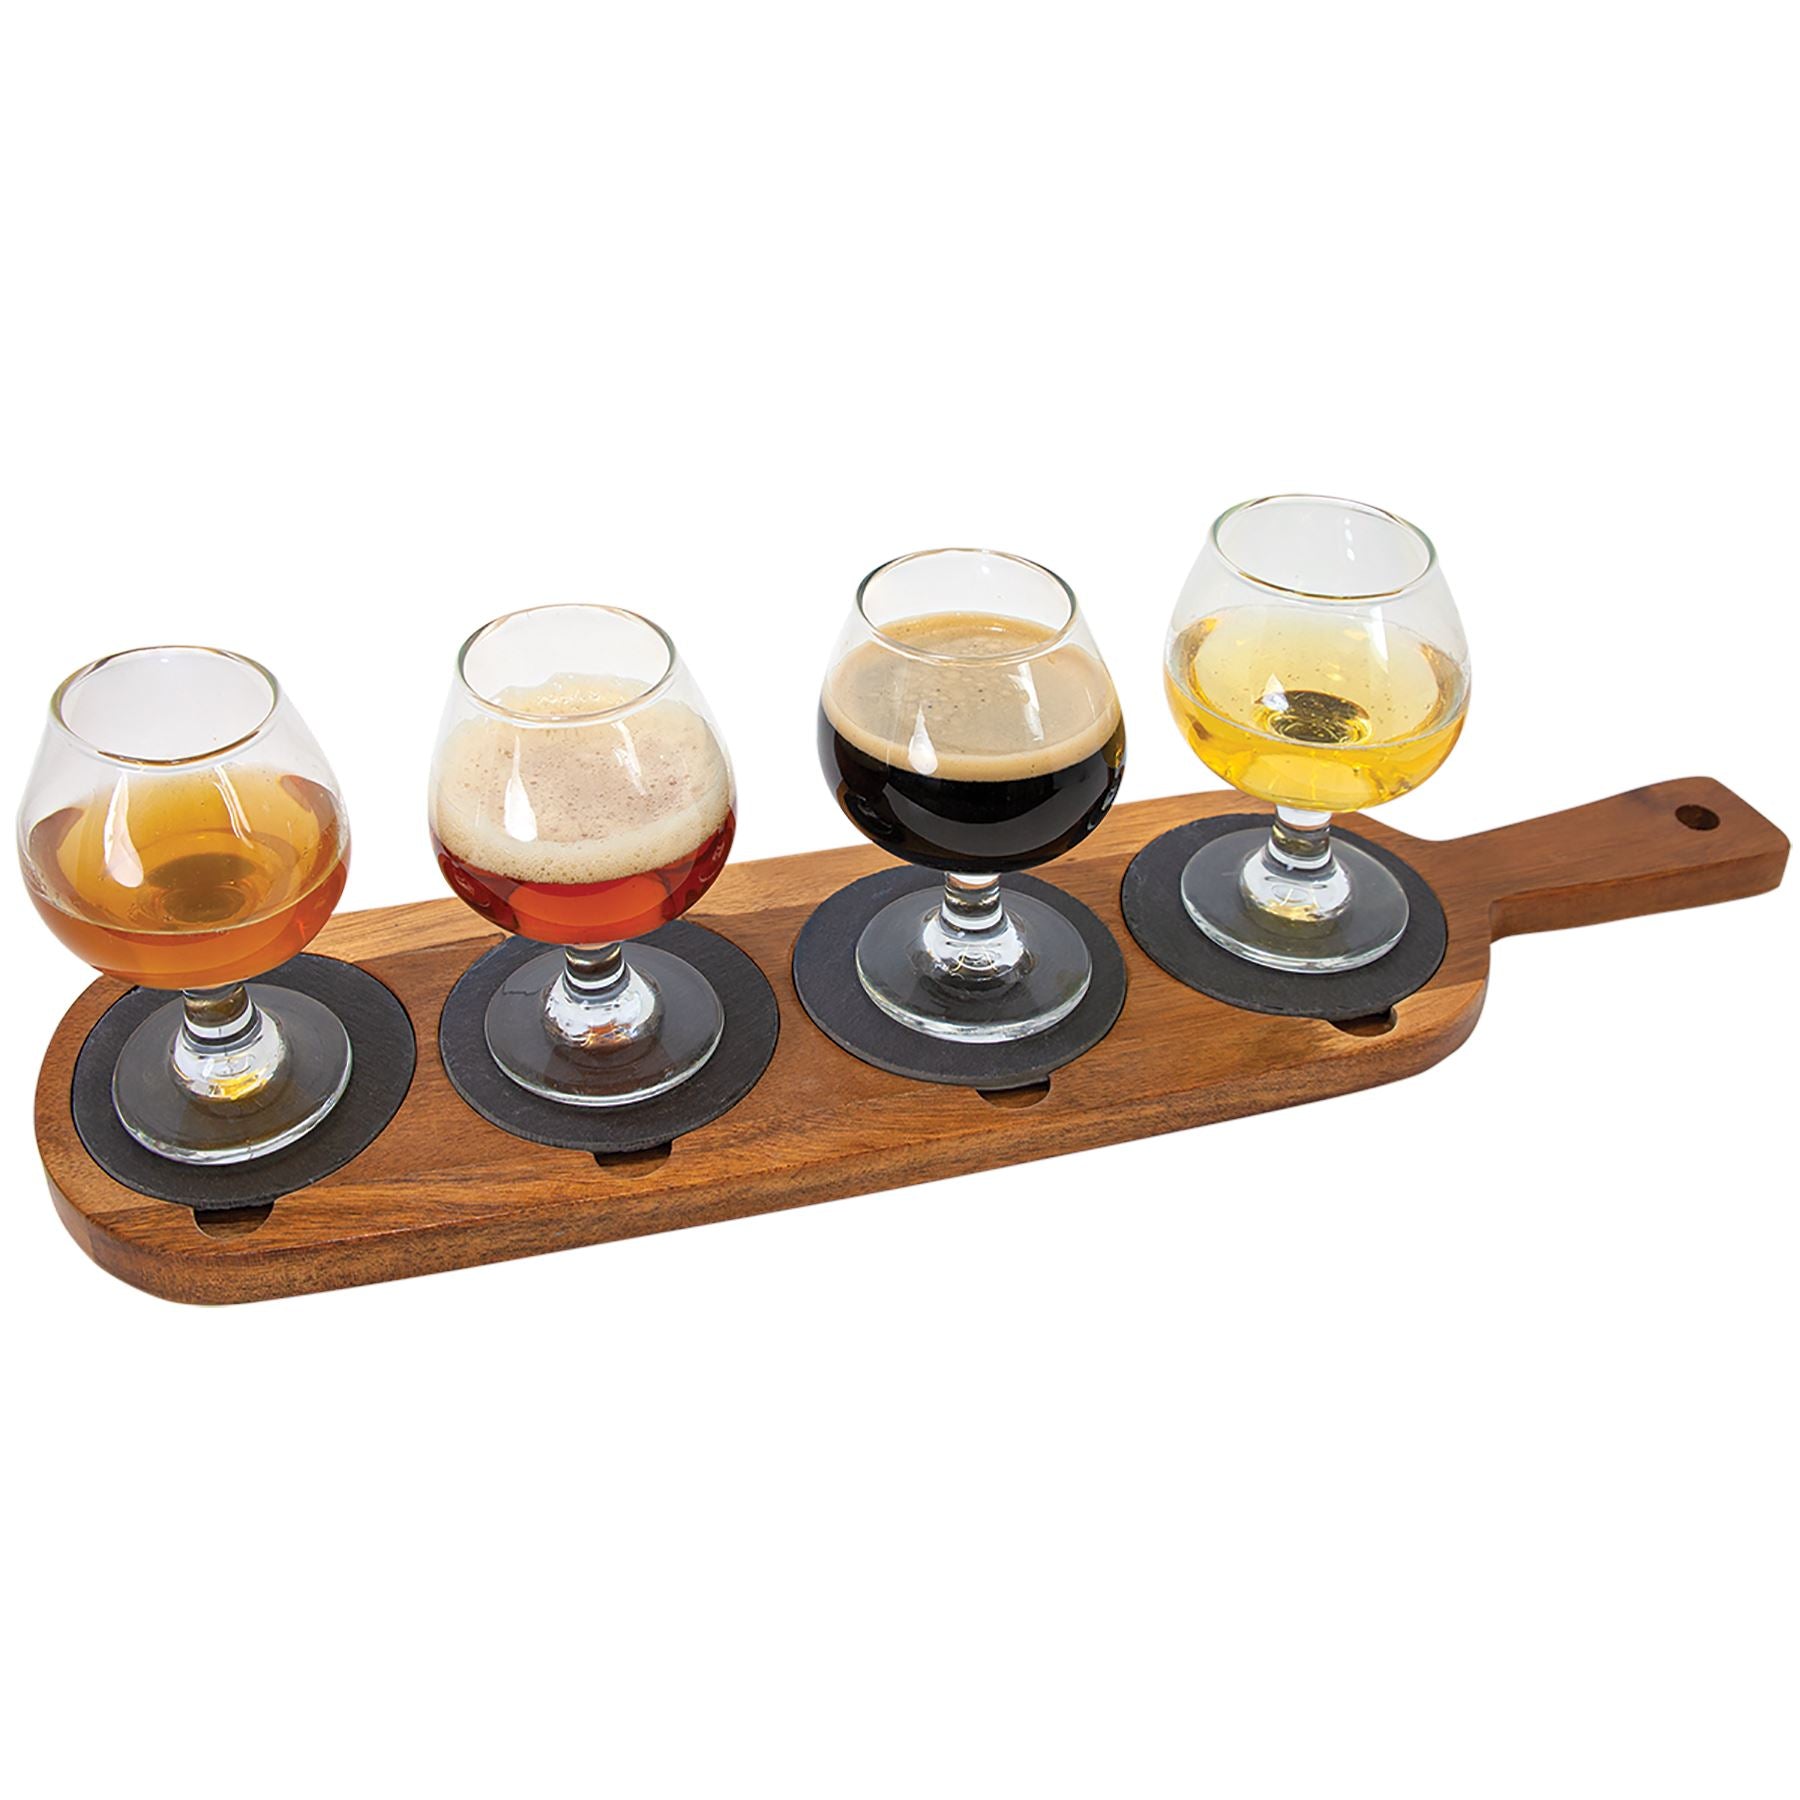 Acacia Serving Board w/3 1/4" Round Coasters, 18 1/2" x 4 1/4" Cutting/Serving Board Craftworks NW 